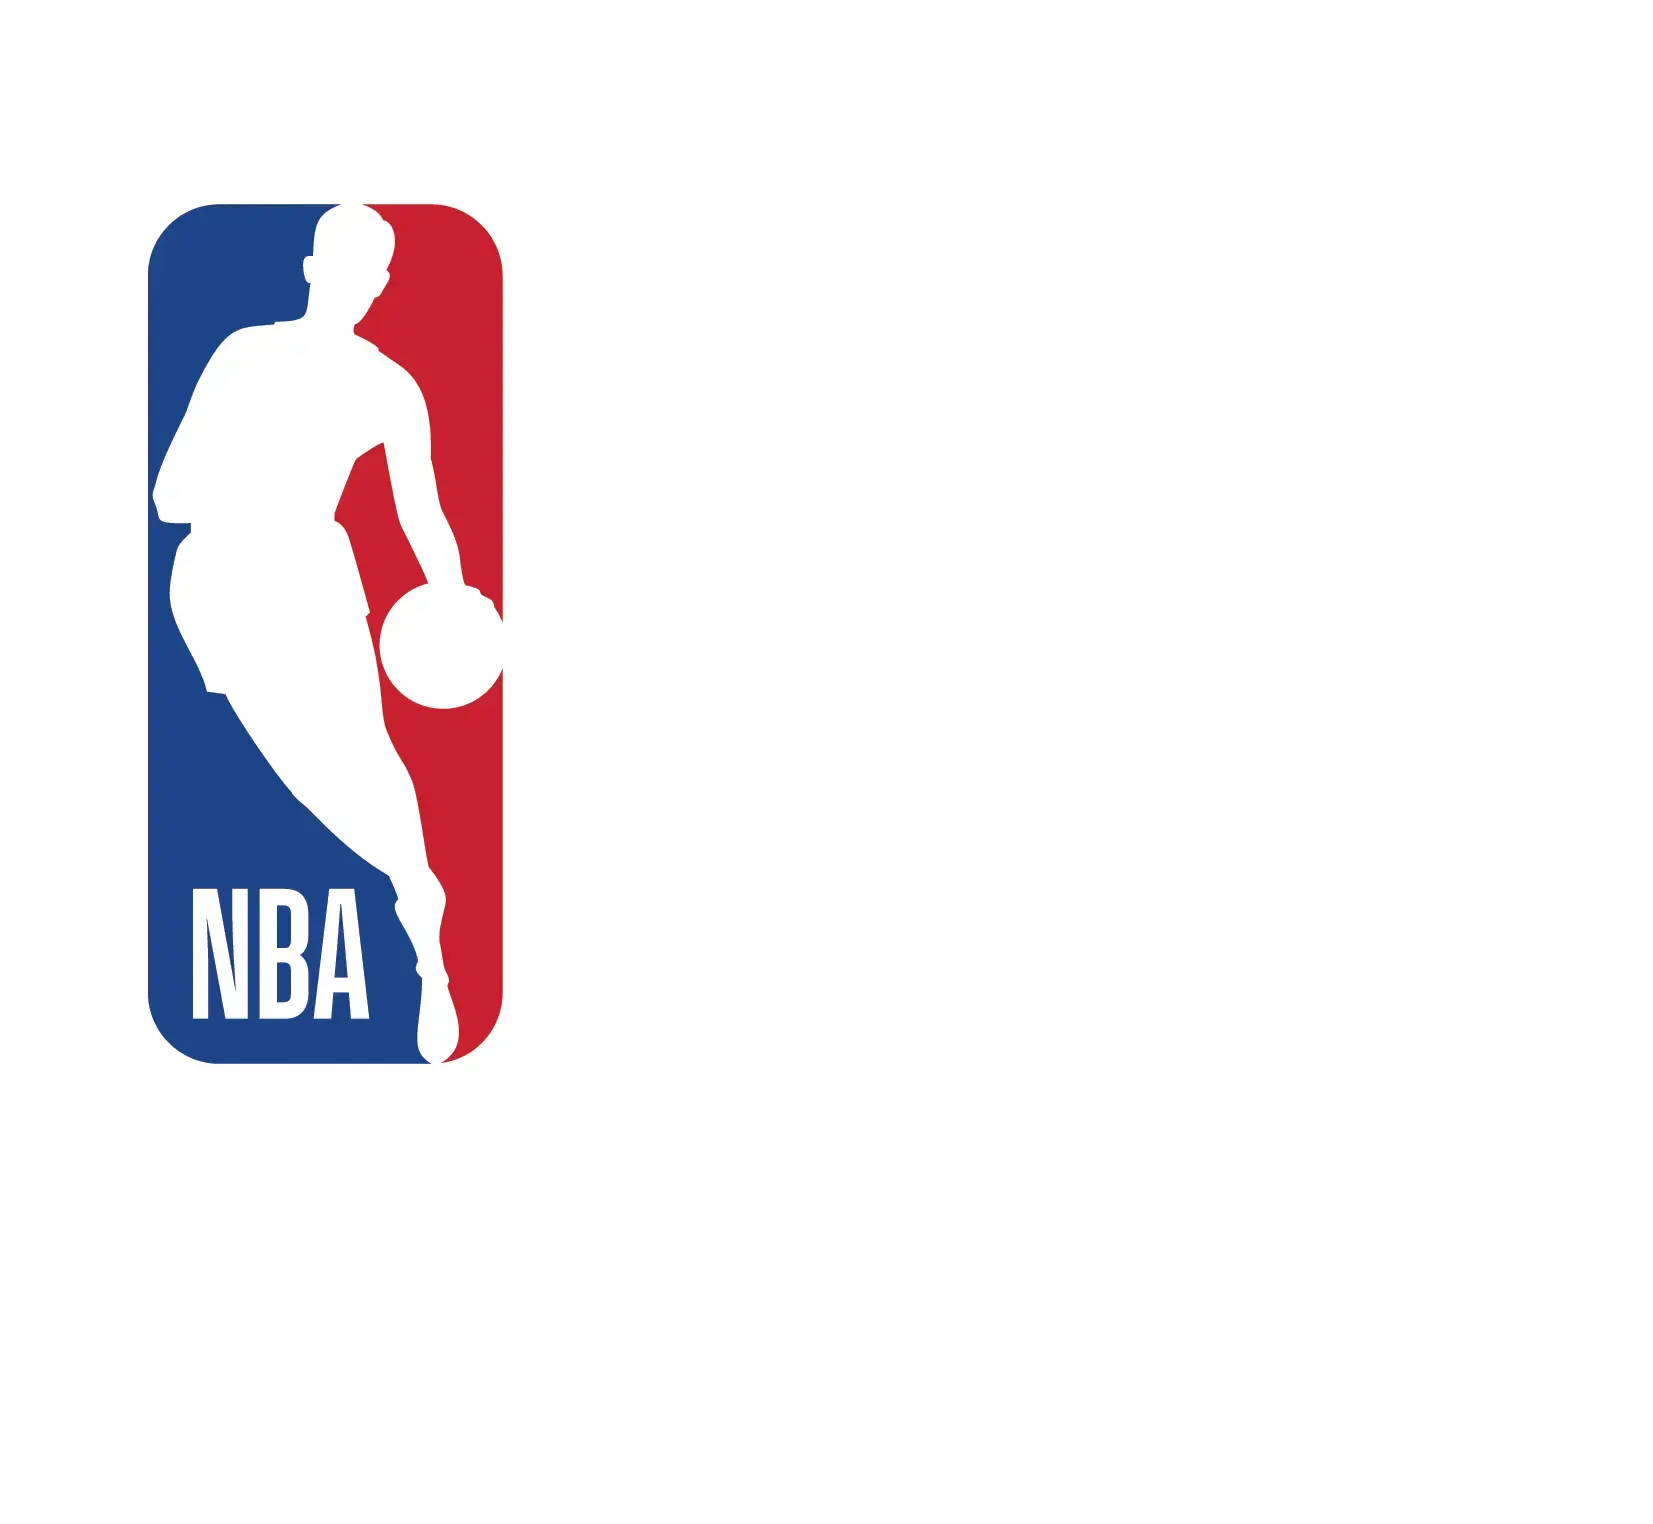 Group bookings for The NBA Exhibition in Brisbane